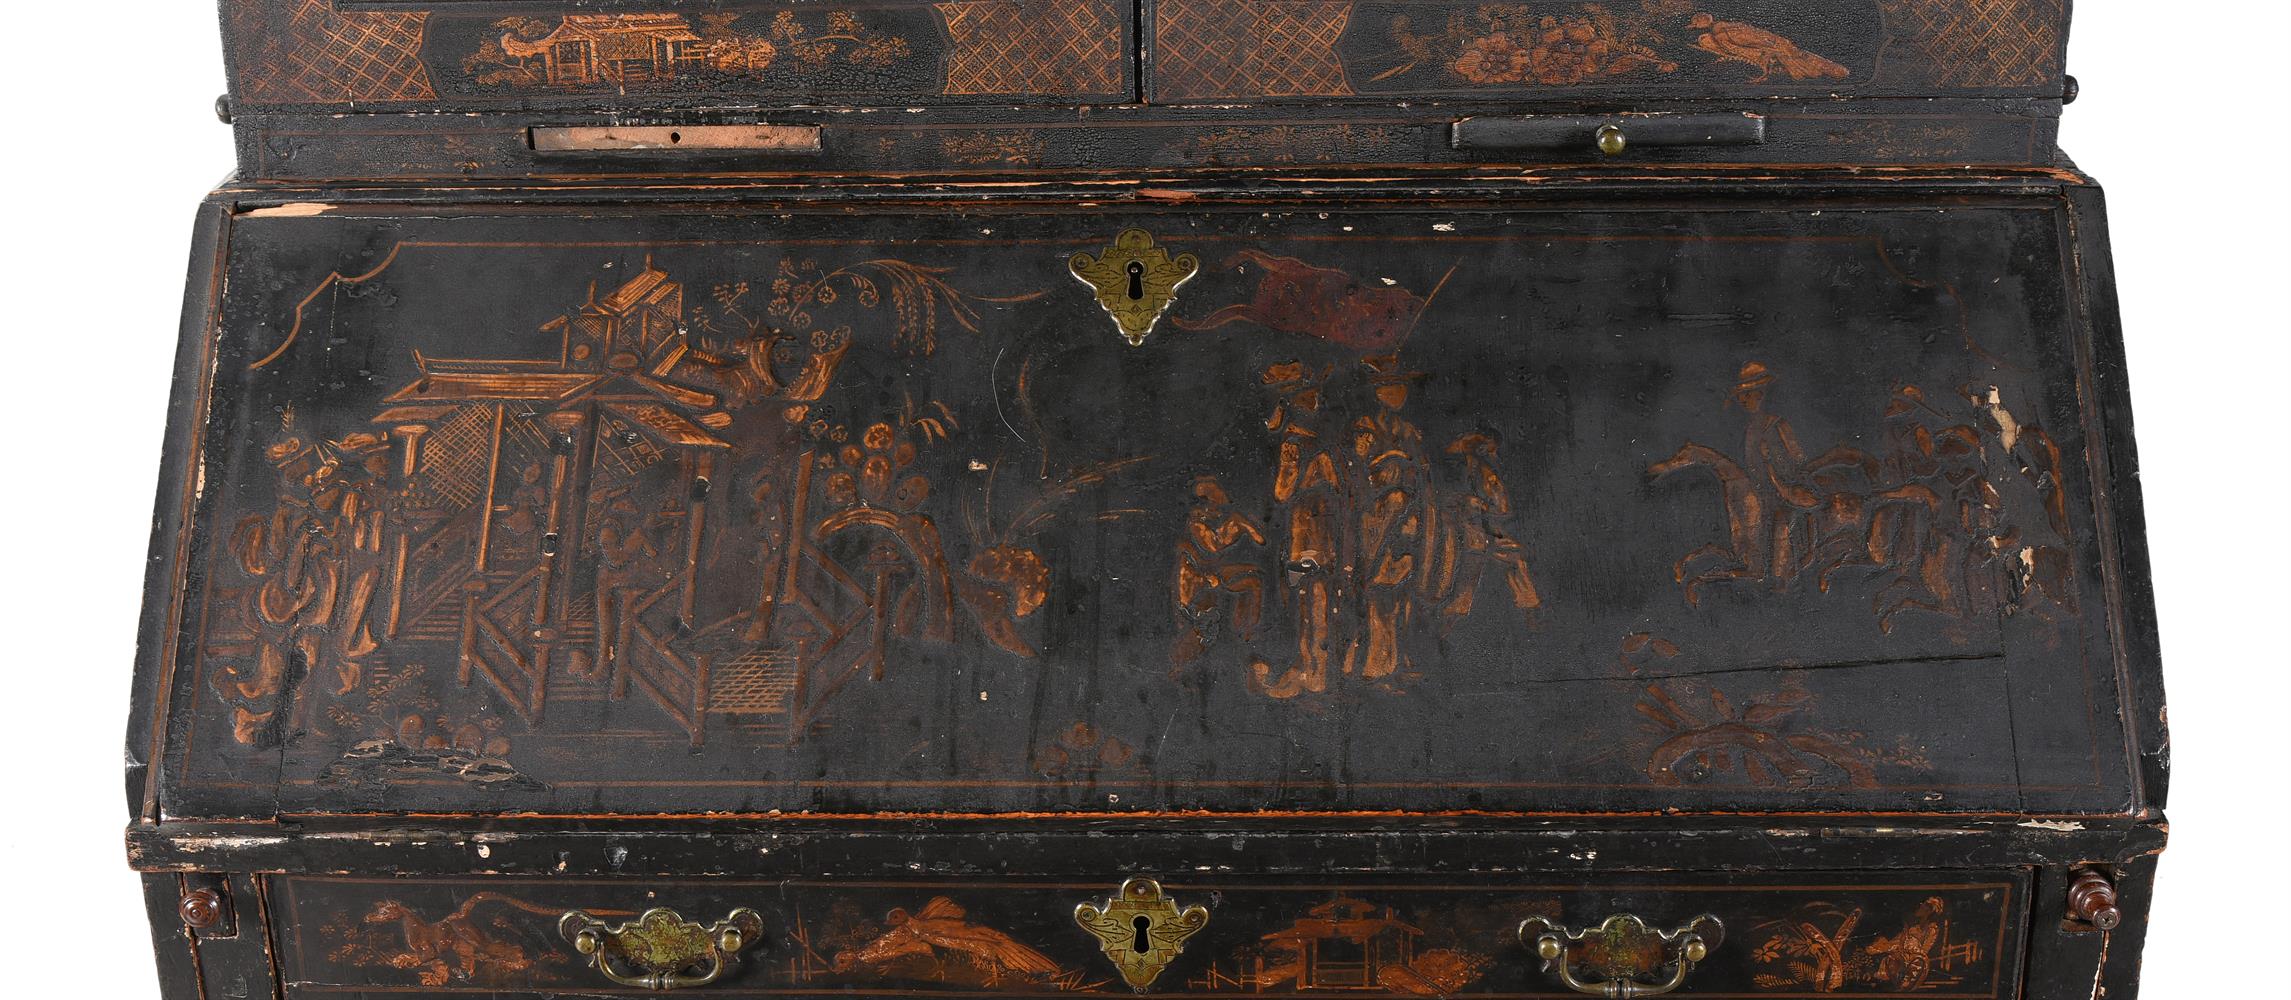 A GEORGE II BLACK LACQUER AND GILT JAPANNED BUREAU CABINET, CIRCA 1740 - Image 4 of 7